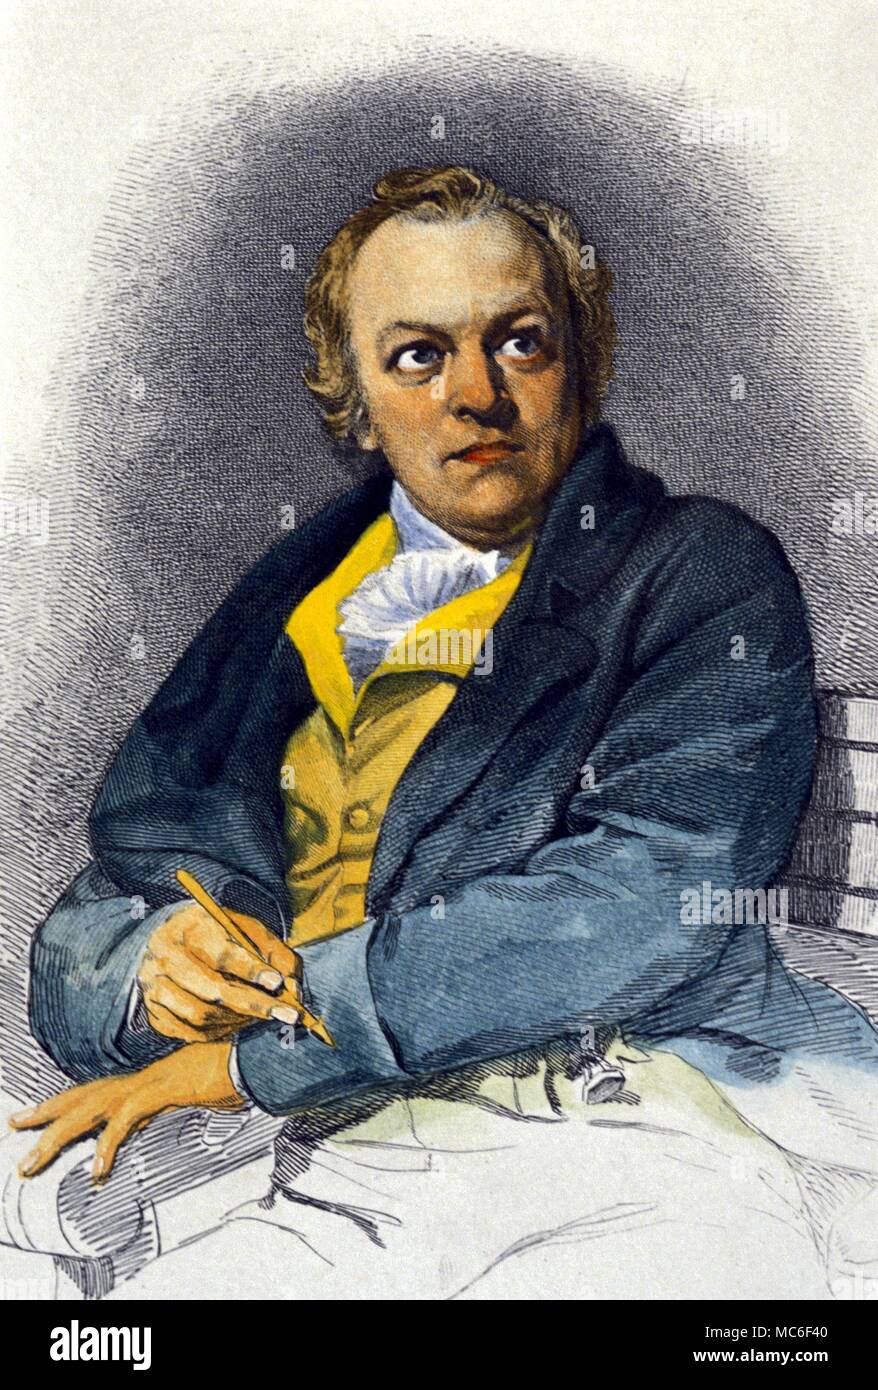 Portrait of the occultist artist poet William Blake. Engraving by Schivanotti after the painting by Phillips Stock Photo